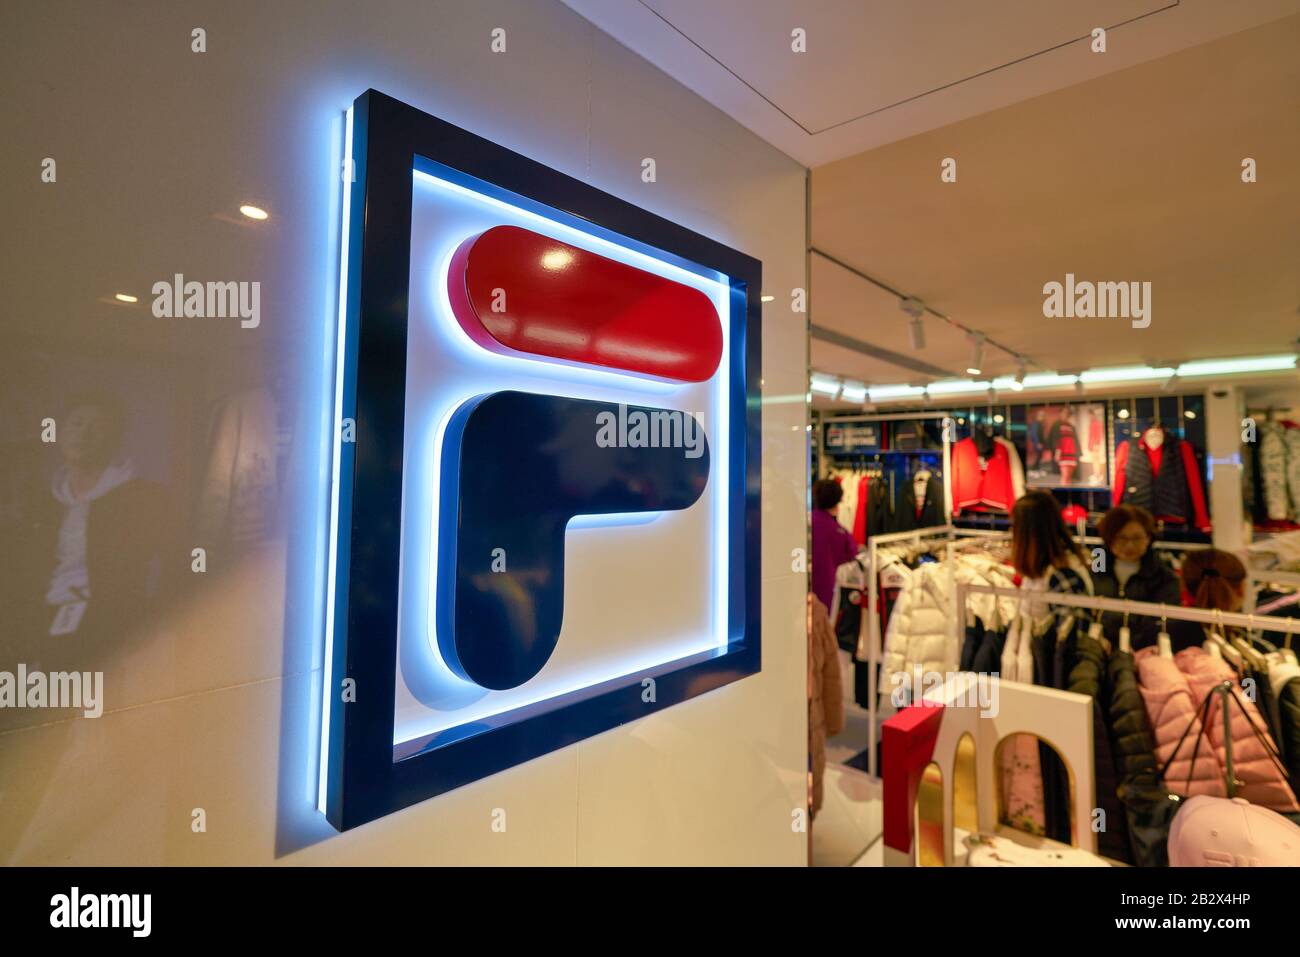 Fila brand hi-res stock photography and images - Page 3 - Alamy